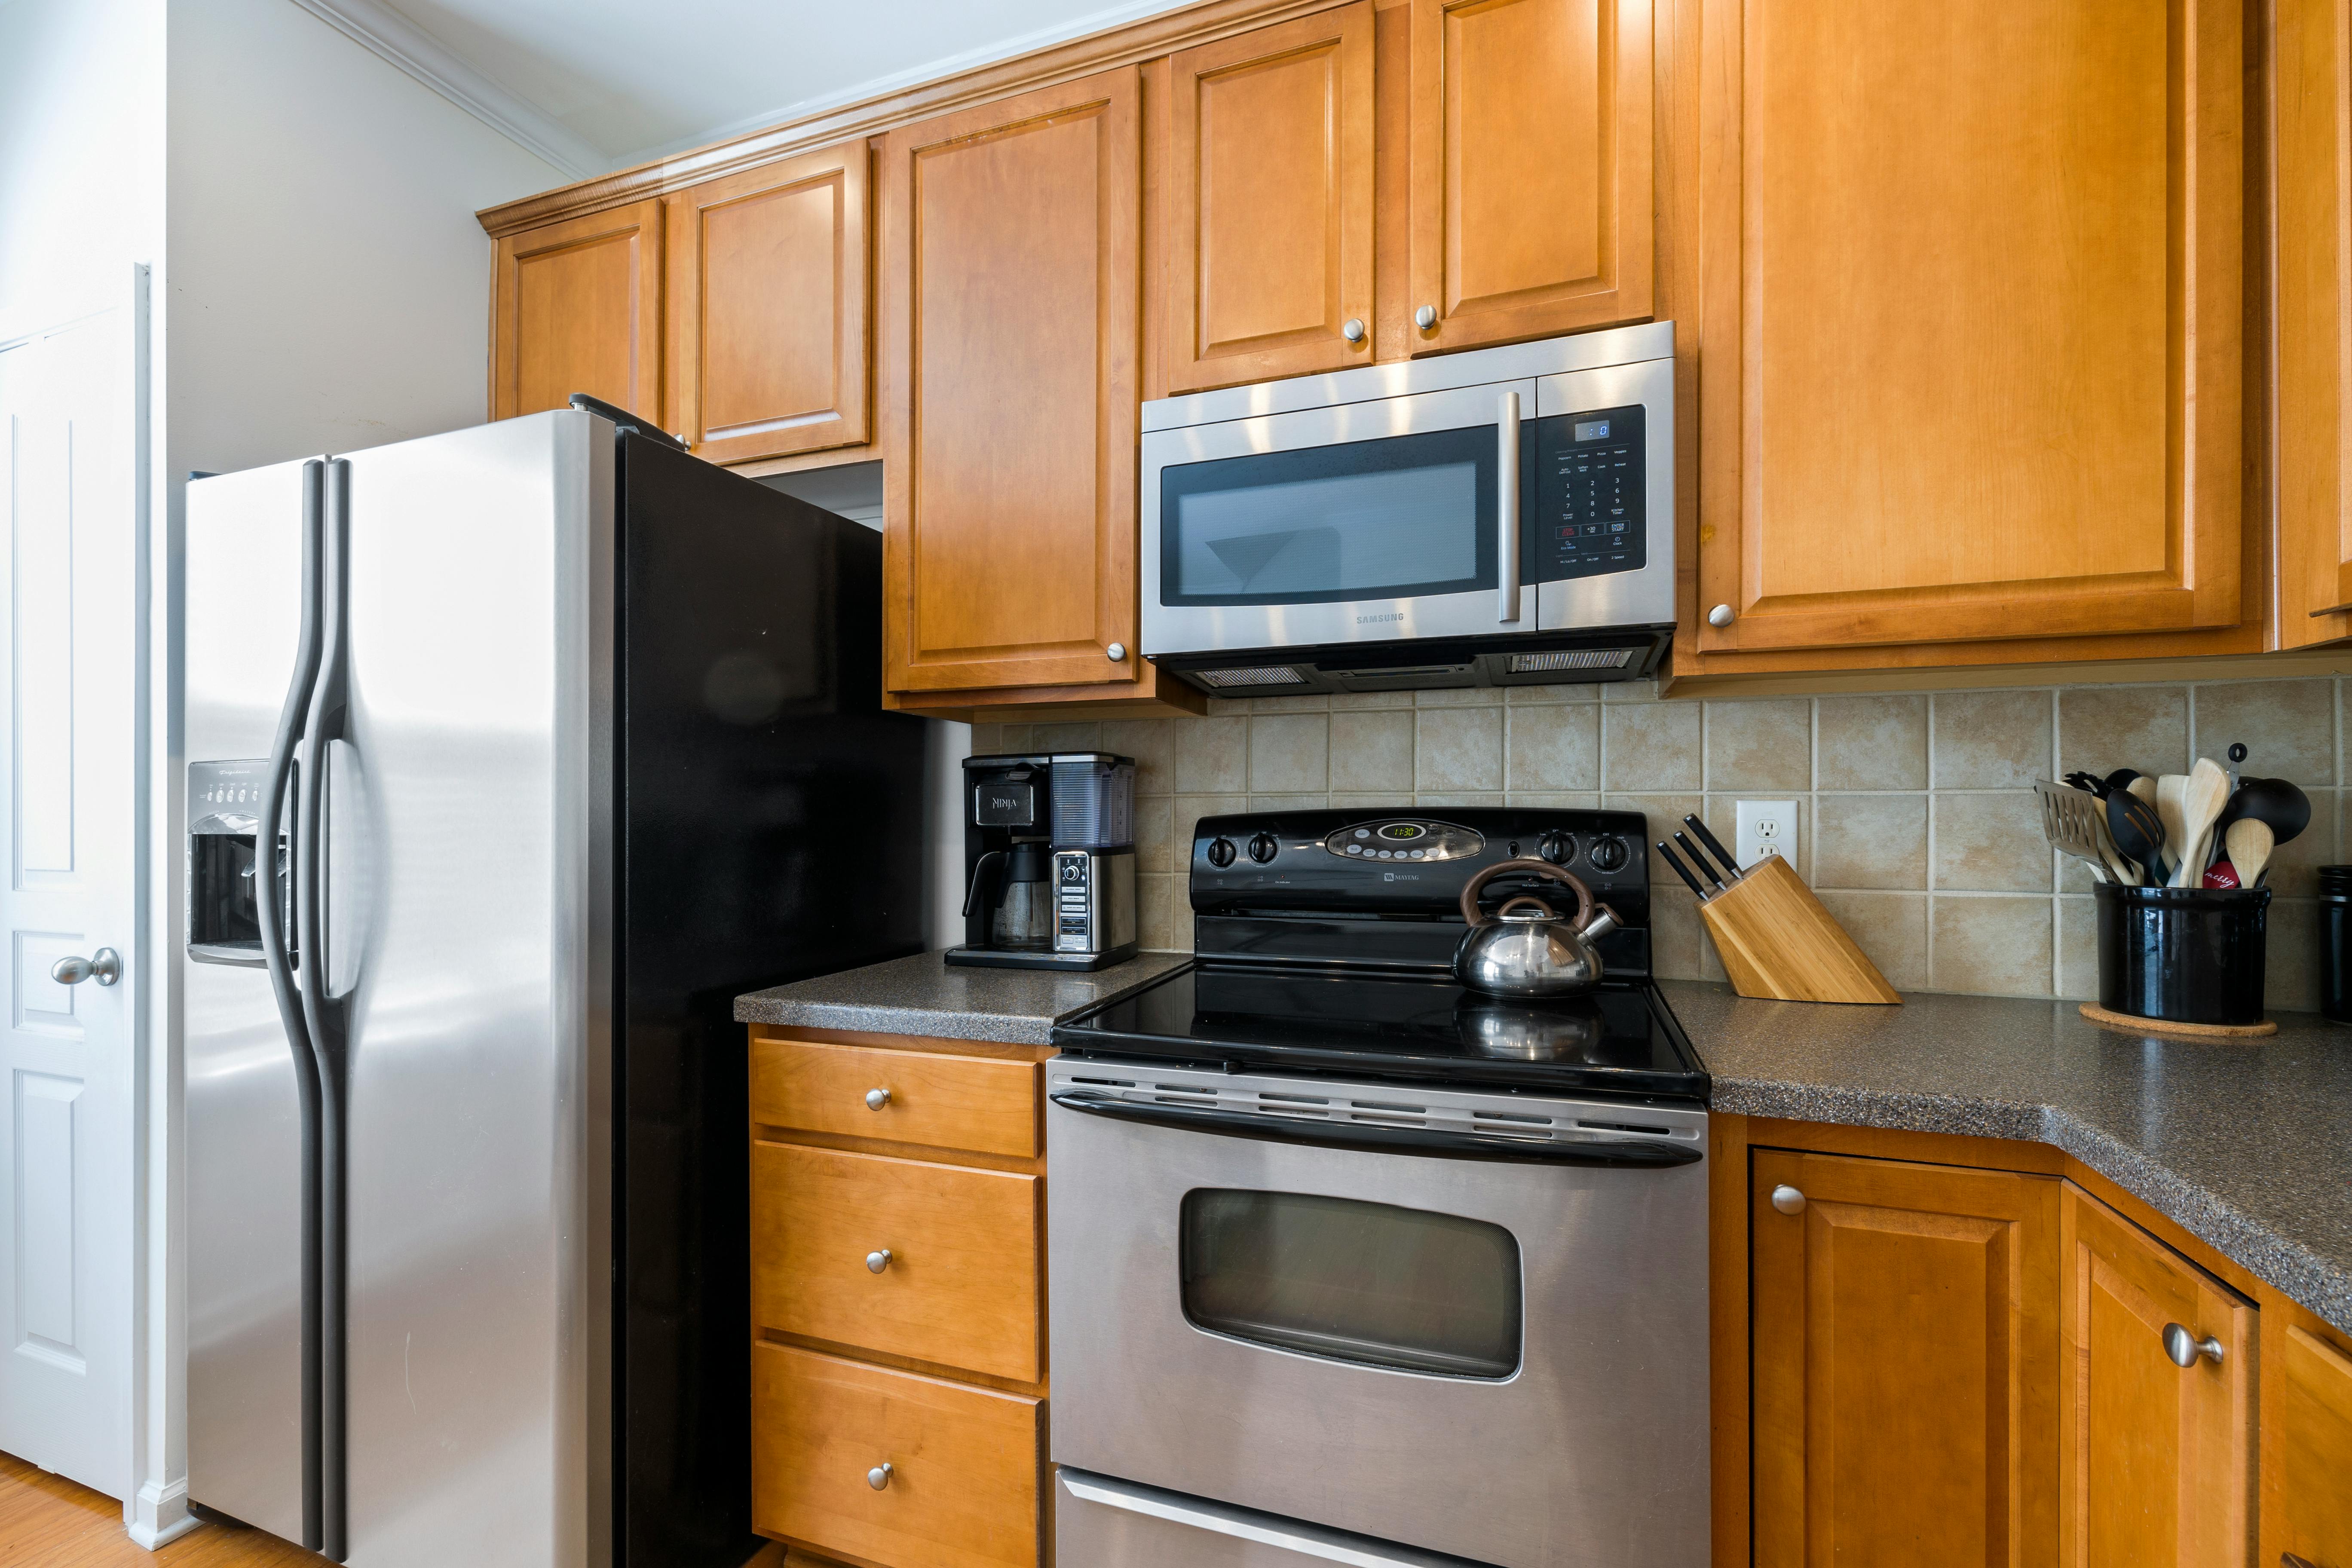 Maintaining Stainless Steel Appliances ⋆ S & W Cabinets